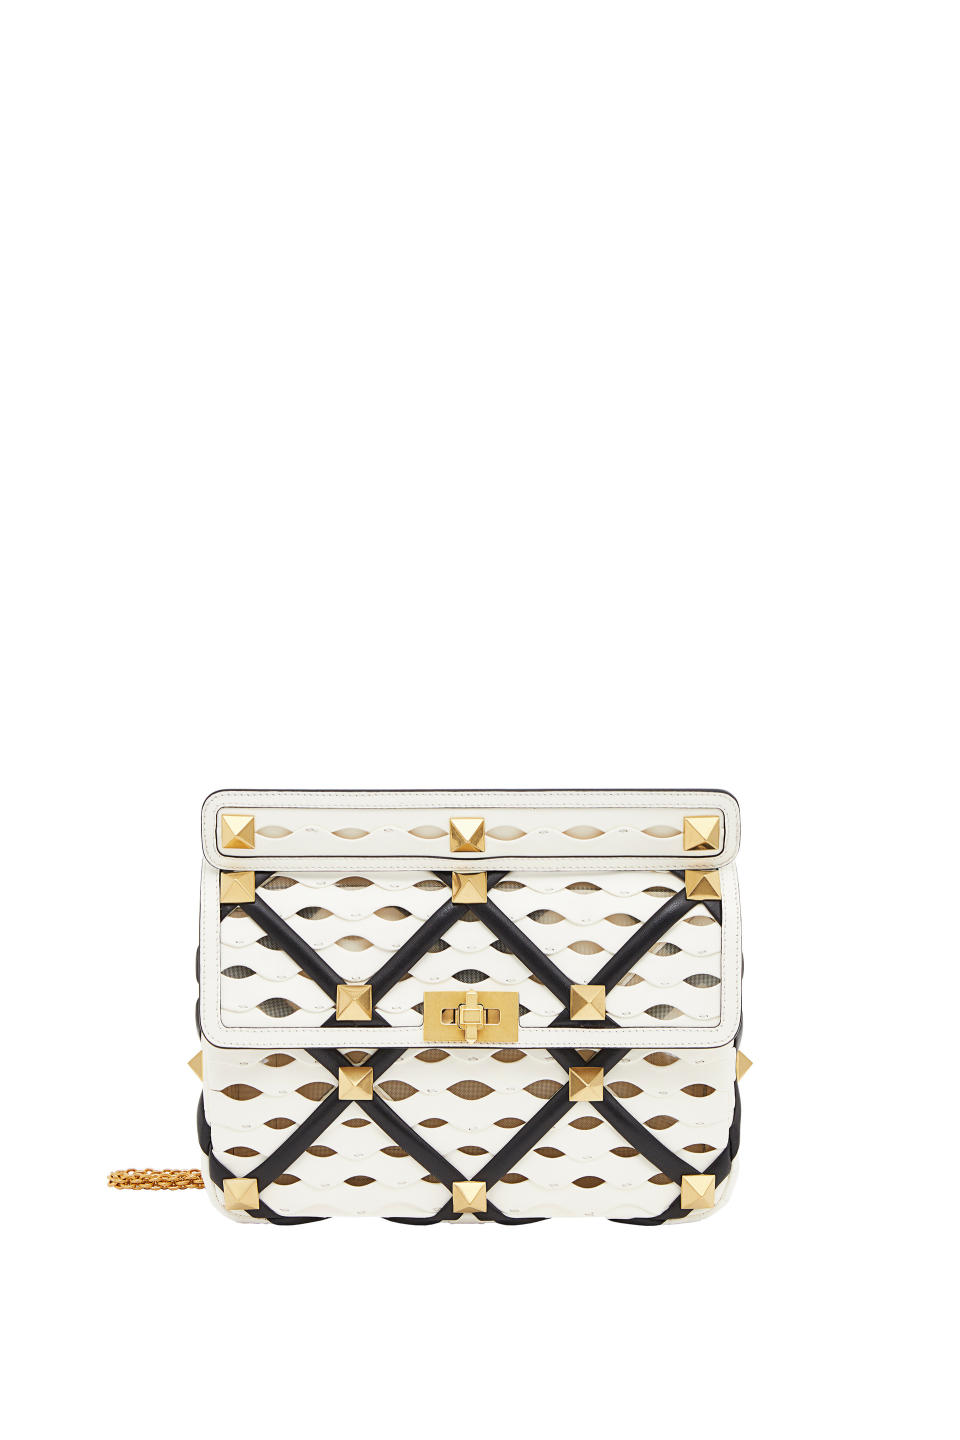 A Valentino Garavani bag from the capsule collection. - Credit: courtesy image